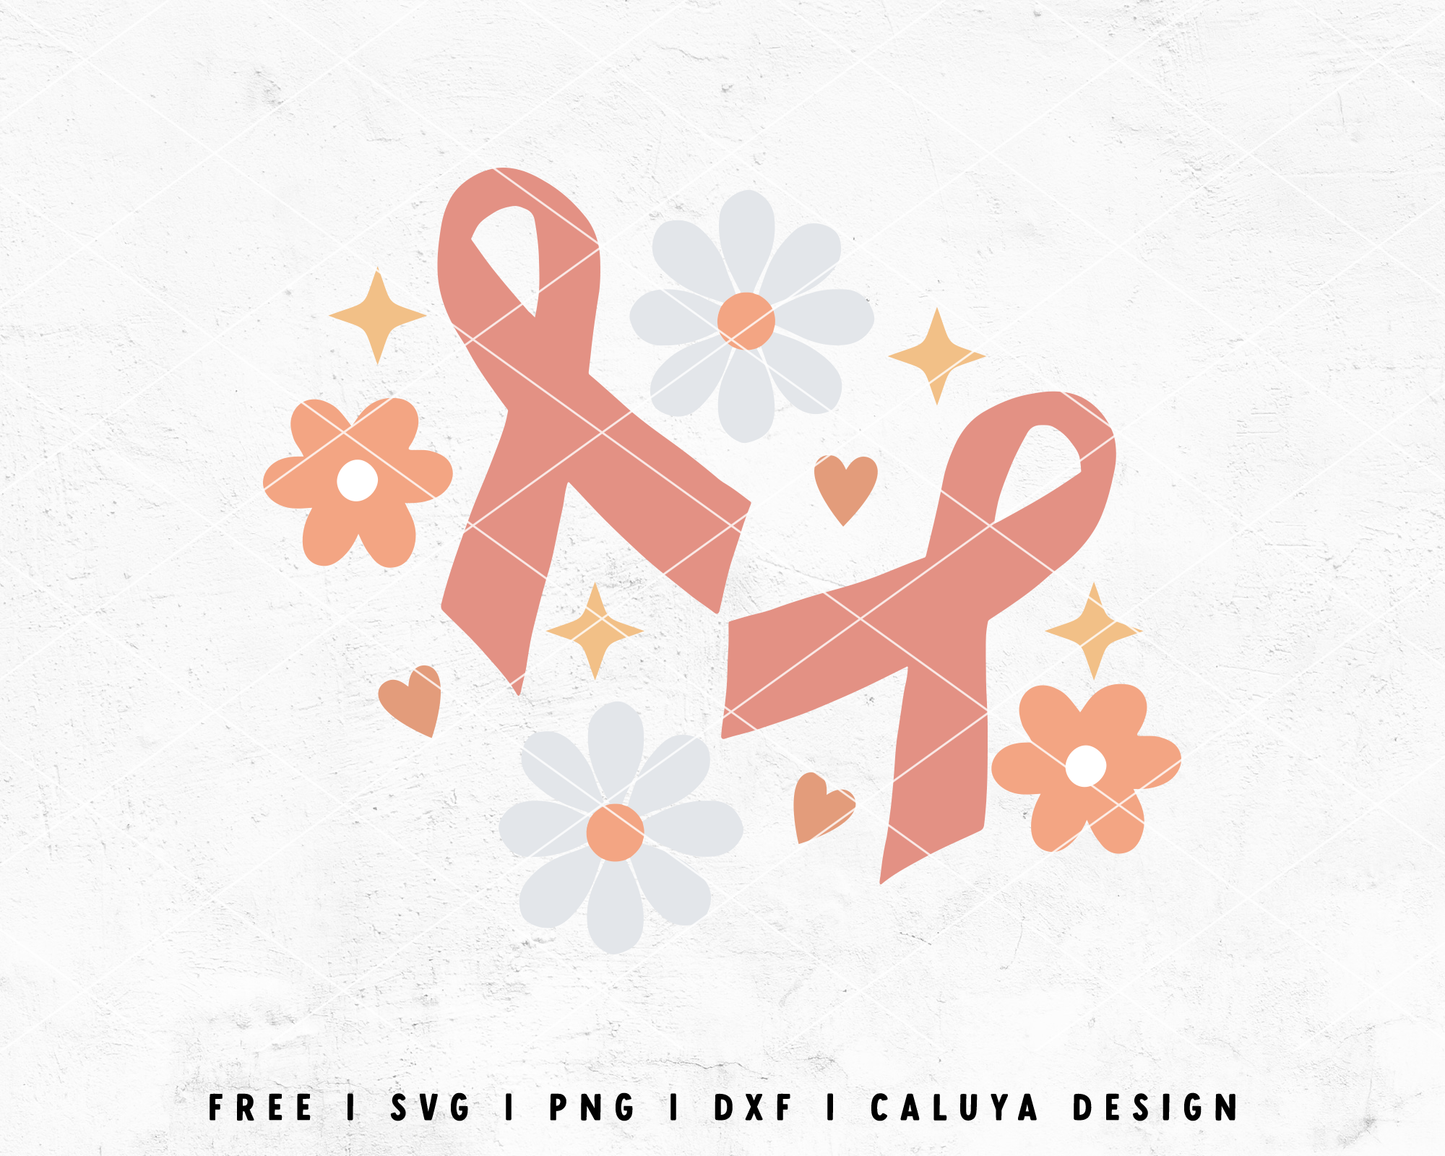 FREE Awareness Ribbon SVG | With Retro Flower SVG Cut File for Cricut, Cameo Silhouette | Free SVG Cut File